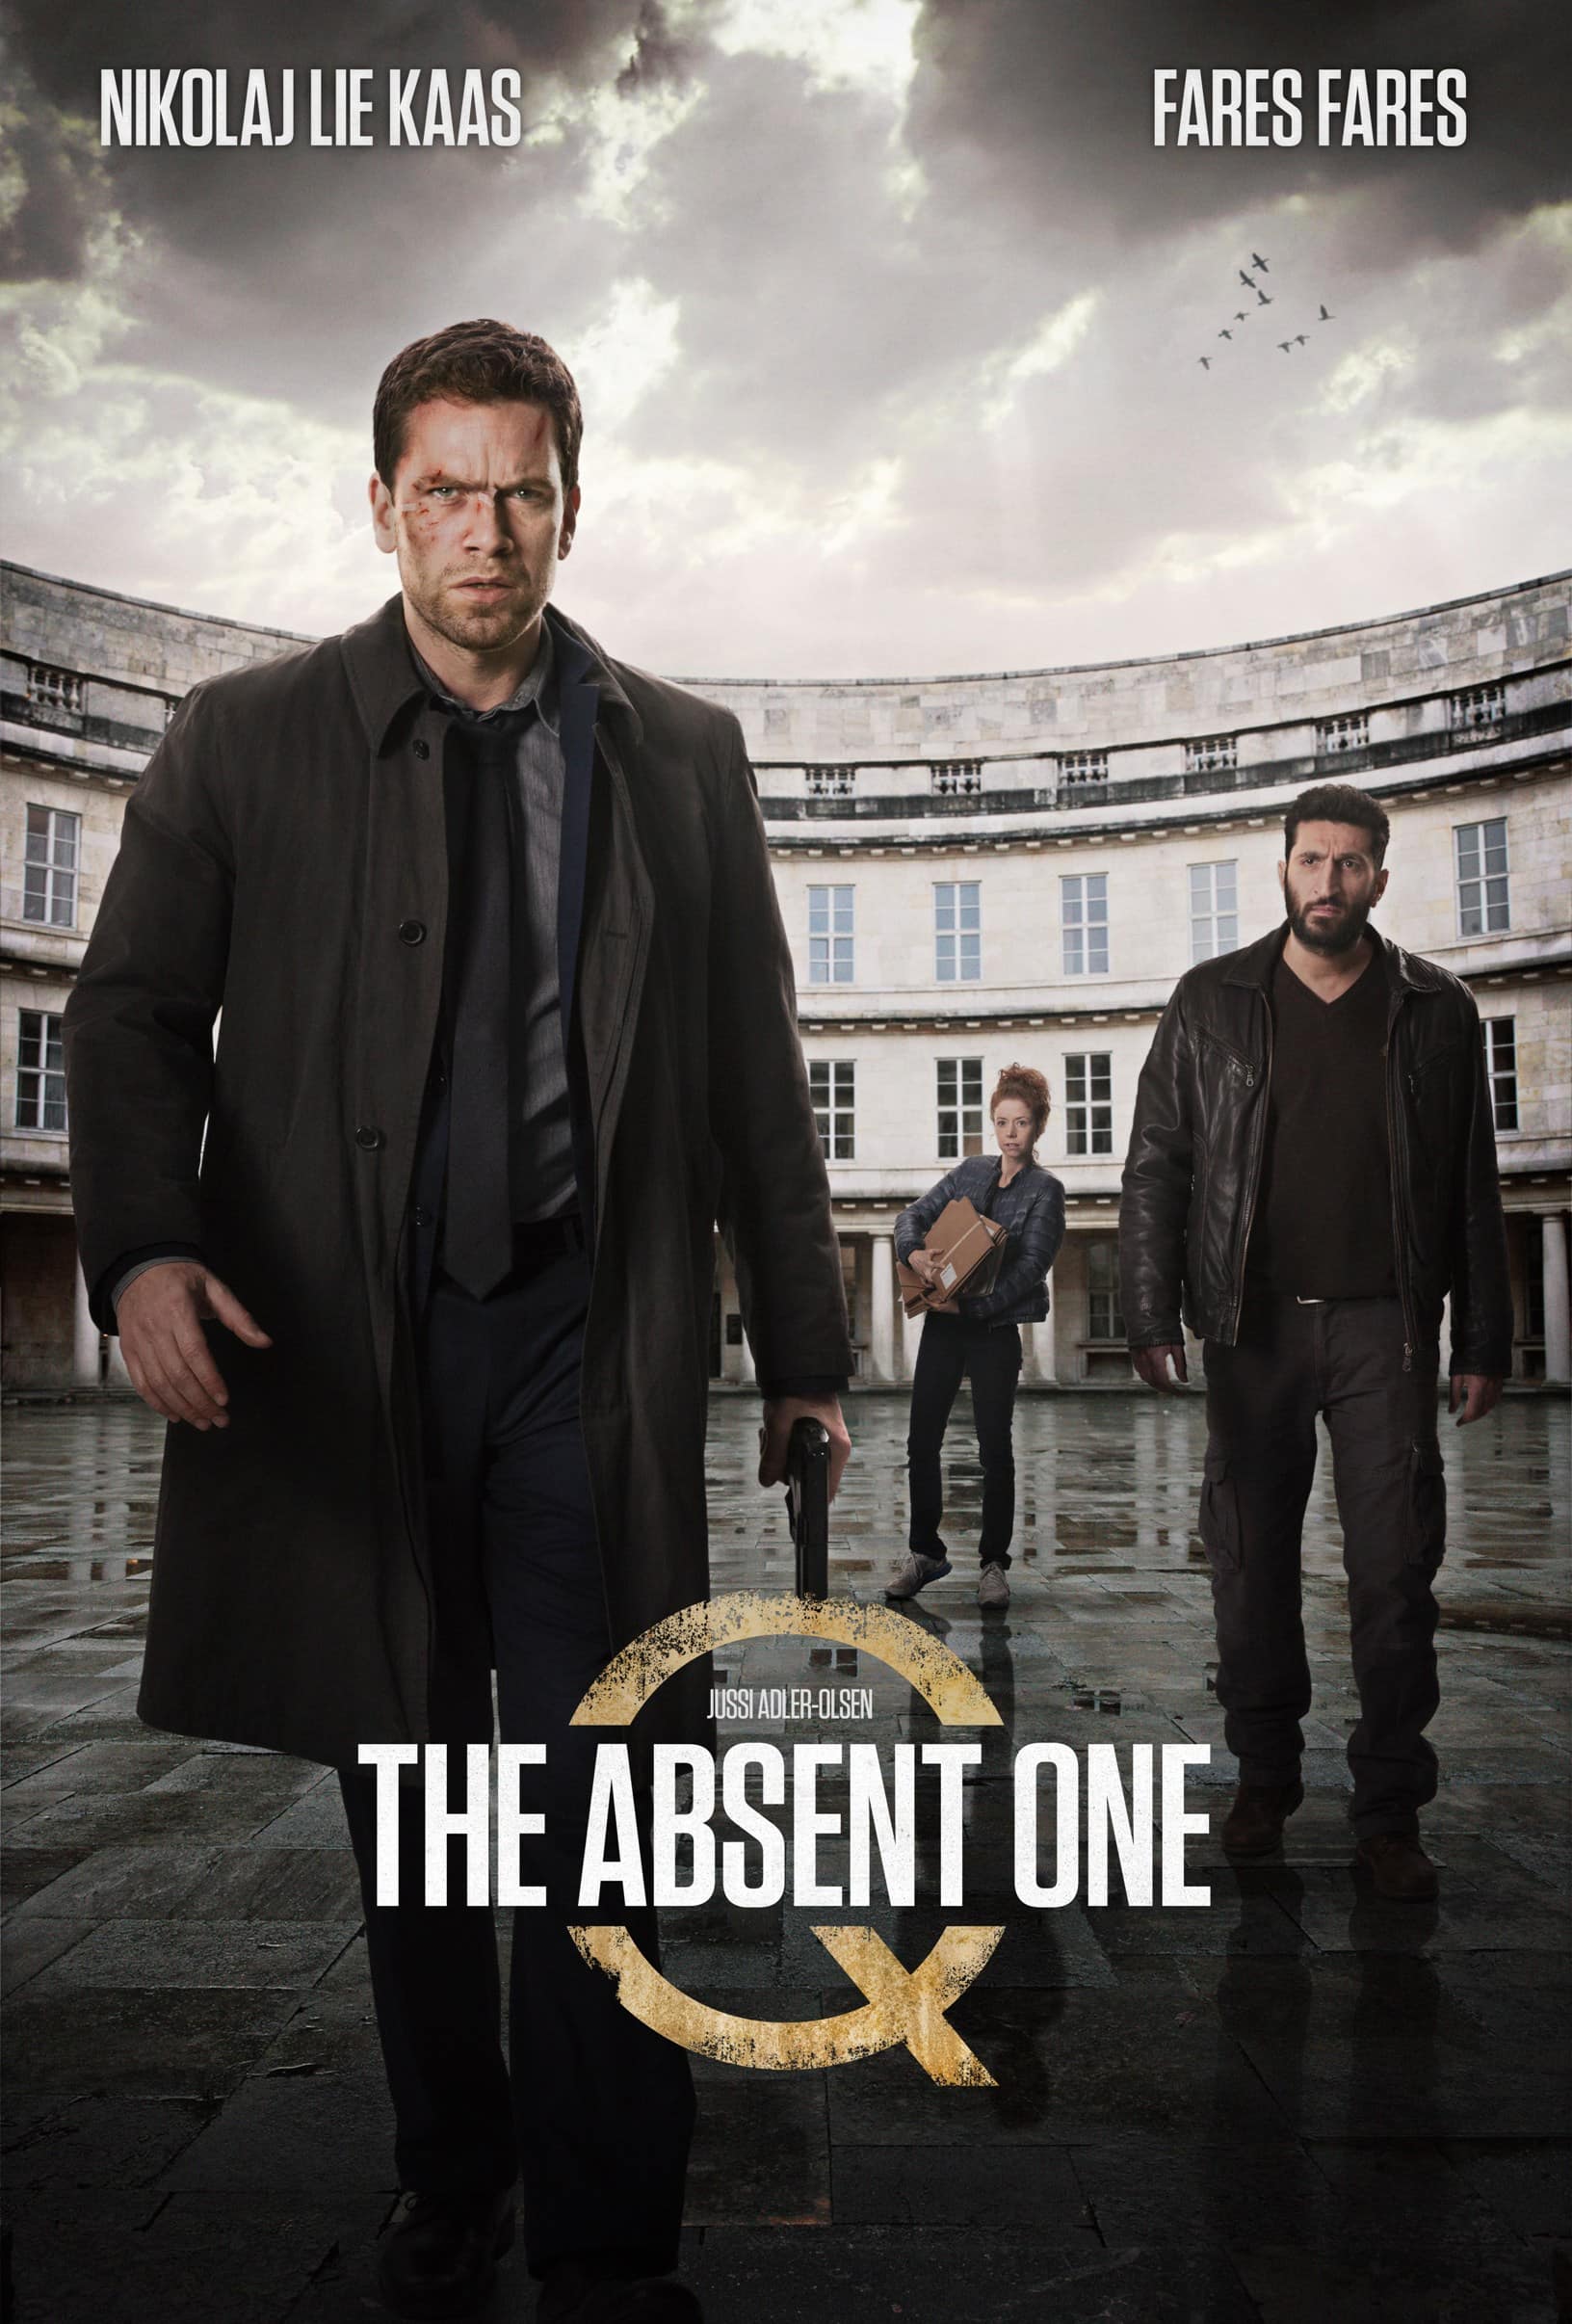 THE ABSENT ONE